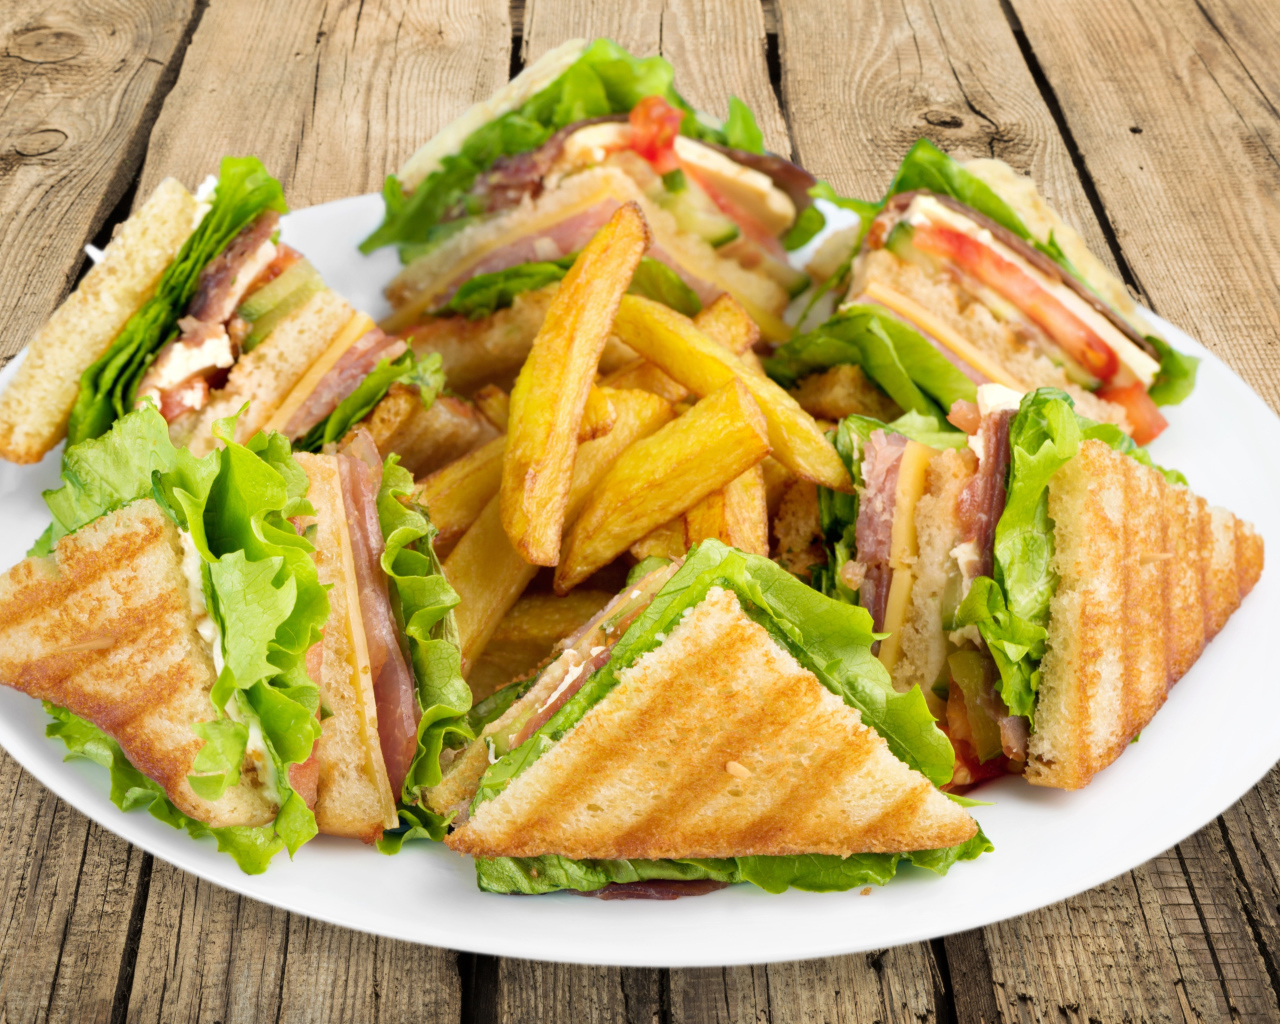 Ham sandwiches on a plate of french fries